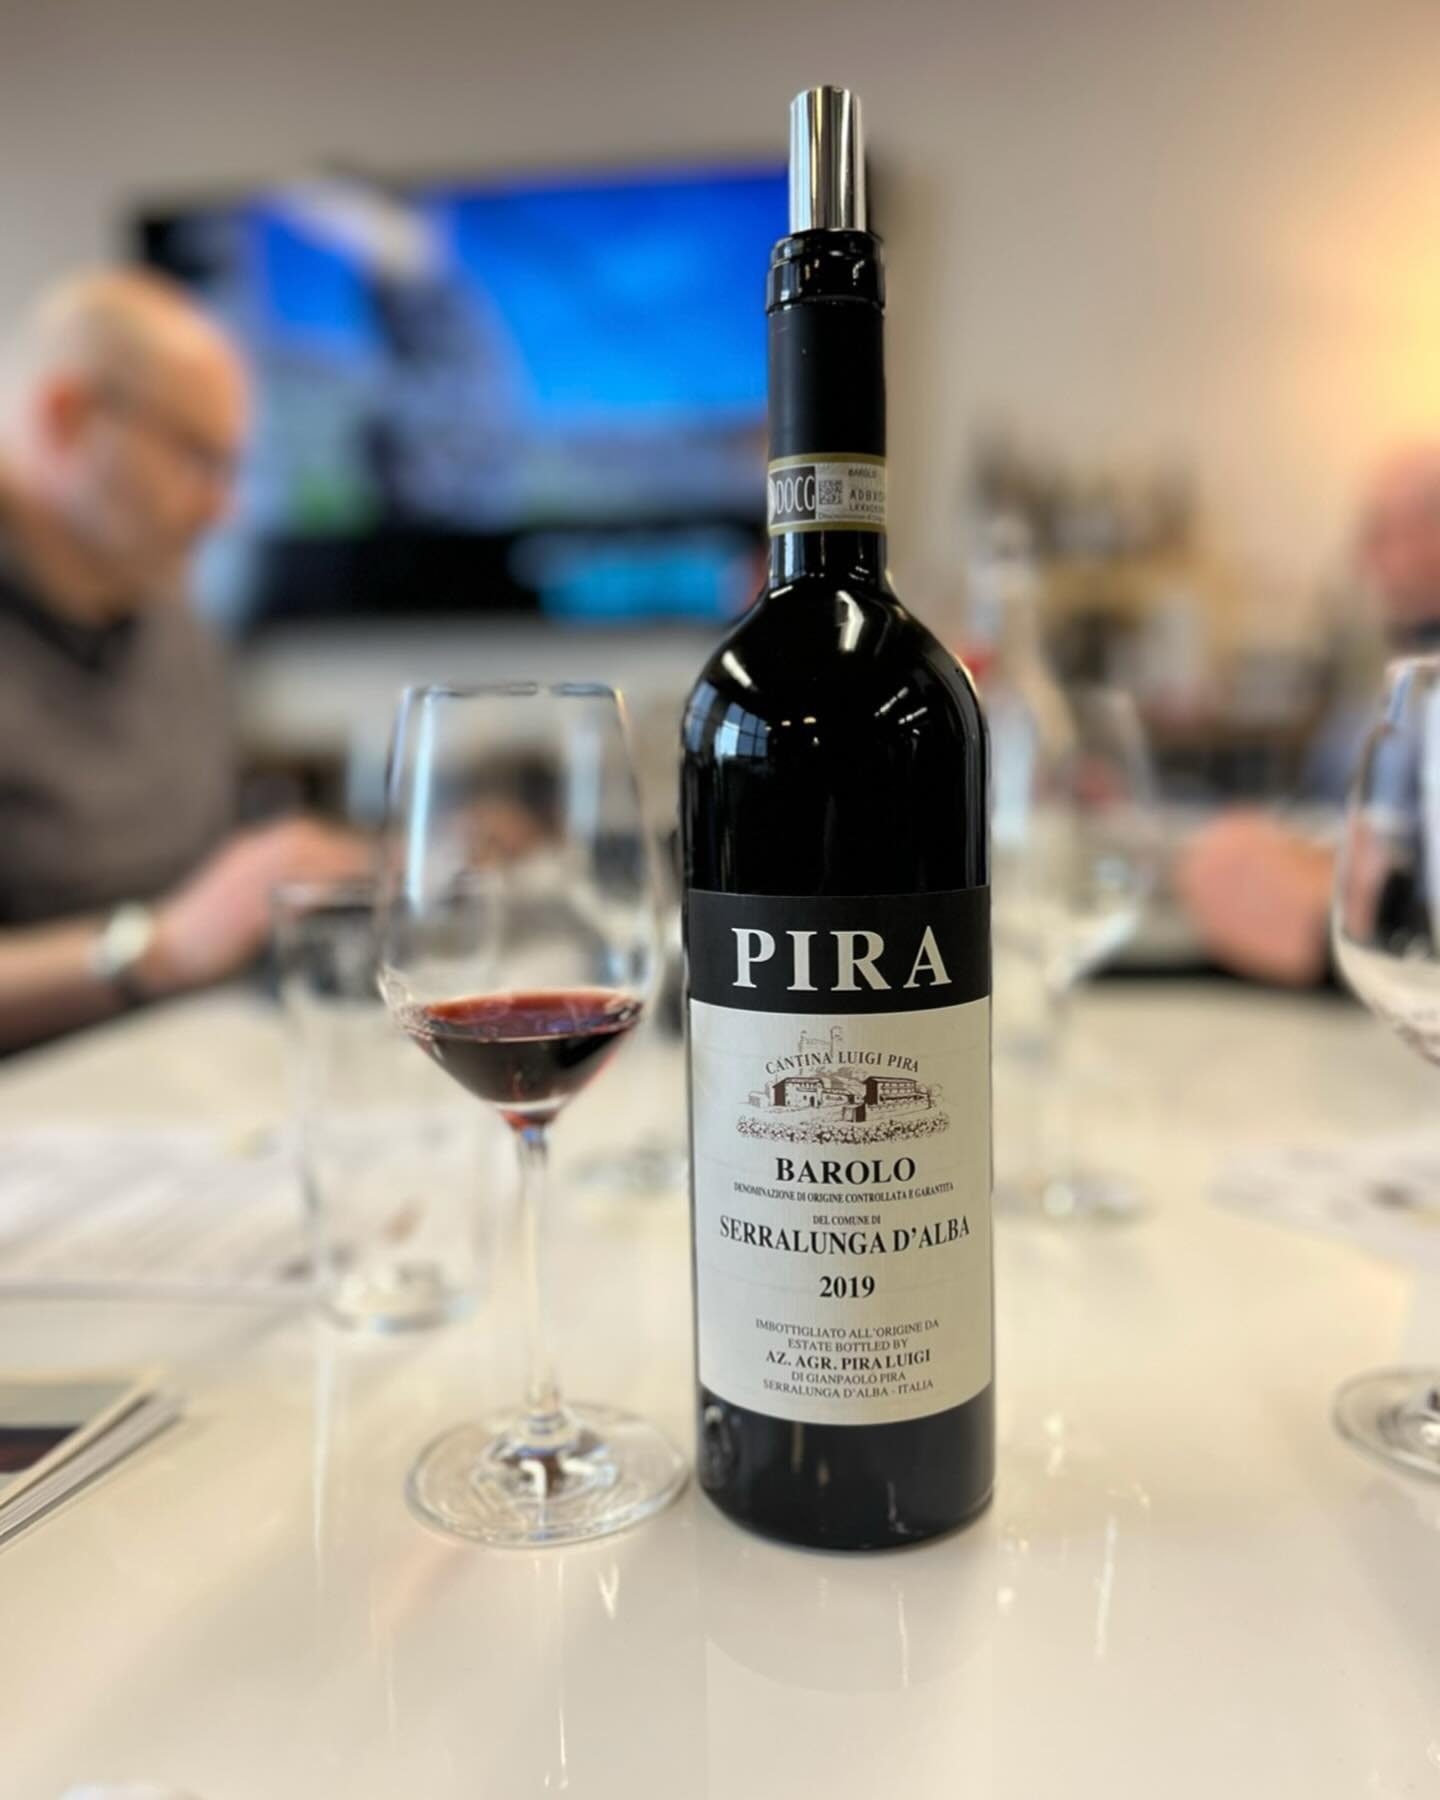 Pira Barolo Commune di Serralnuga 2019:  100% Nebbiolo from calcareous clay soils, from vines planted in 1959 and 1995. Fermentation in temperature-controlled tanks and aged for 24 months in wooden nbarrels. Balanced, savory, and laden with notes of 